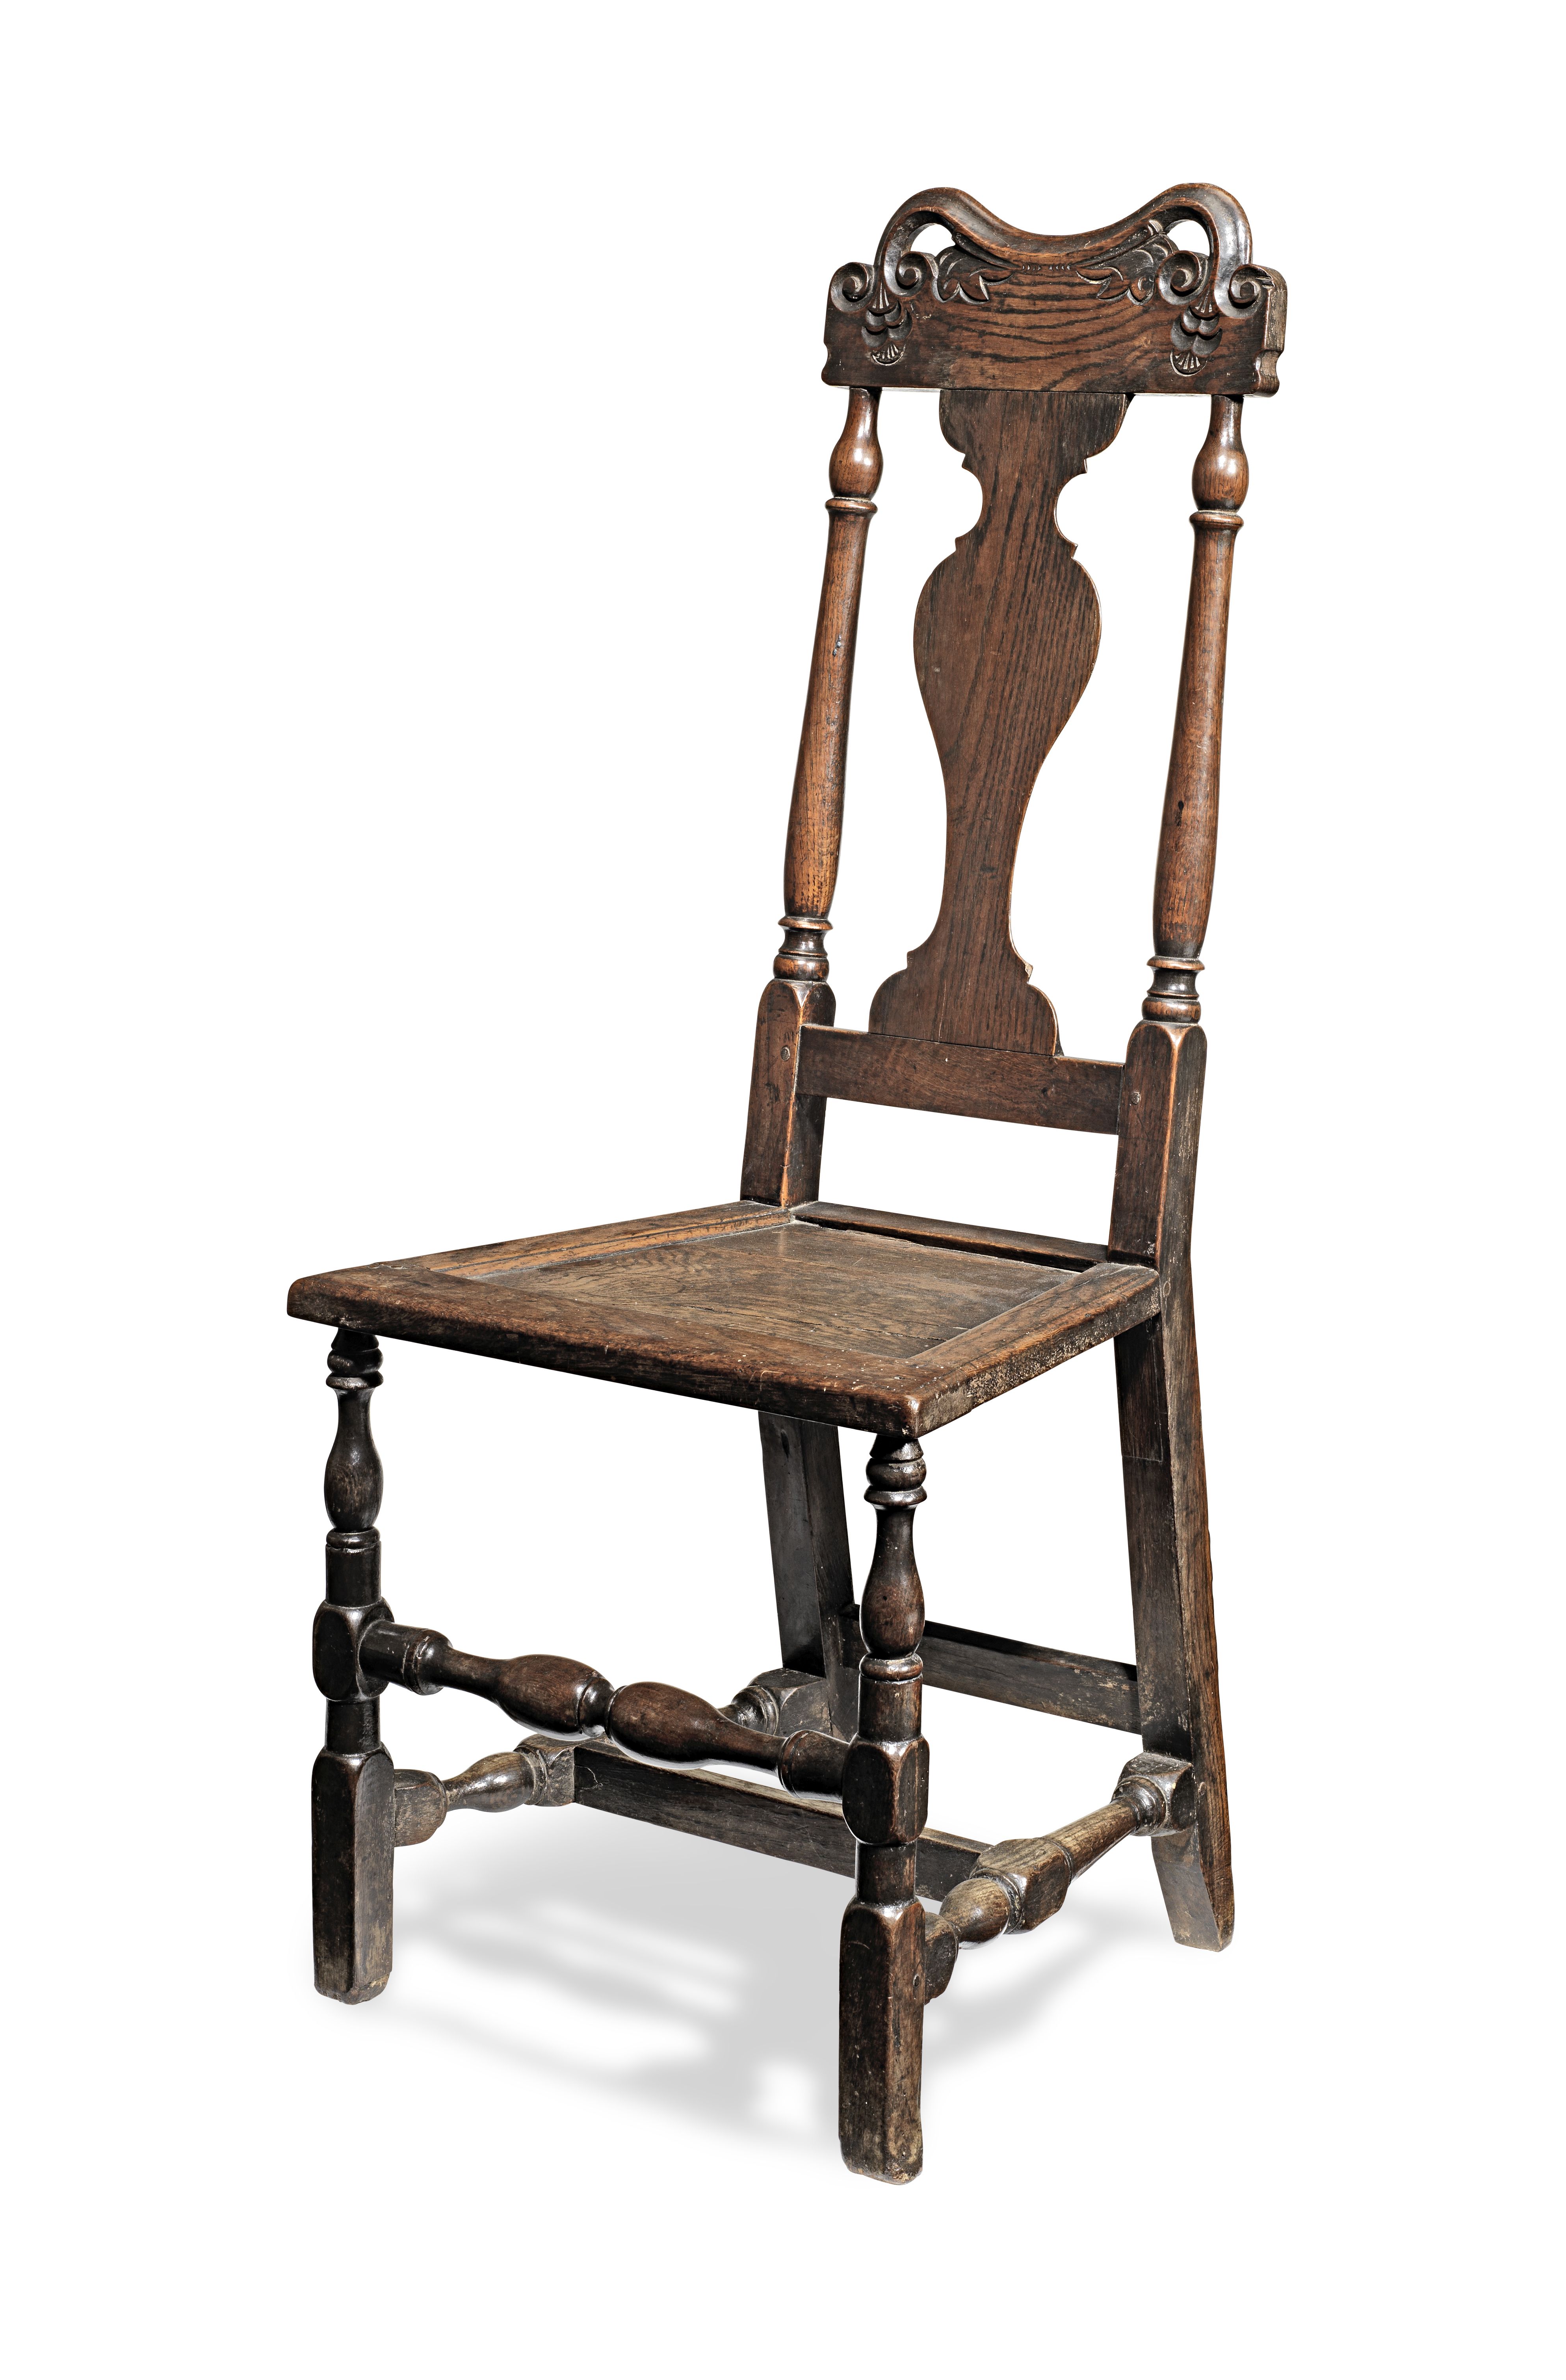 An early 18th century joined oak chair, possibly Welsh, circa 1710-20